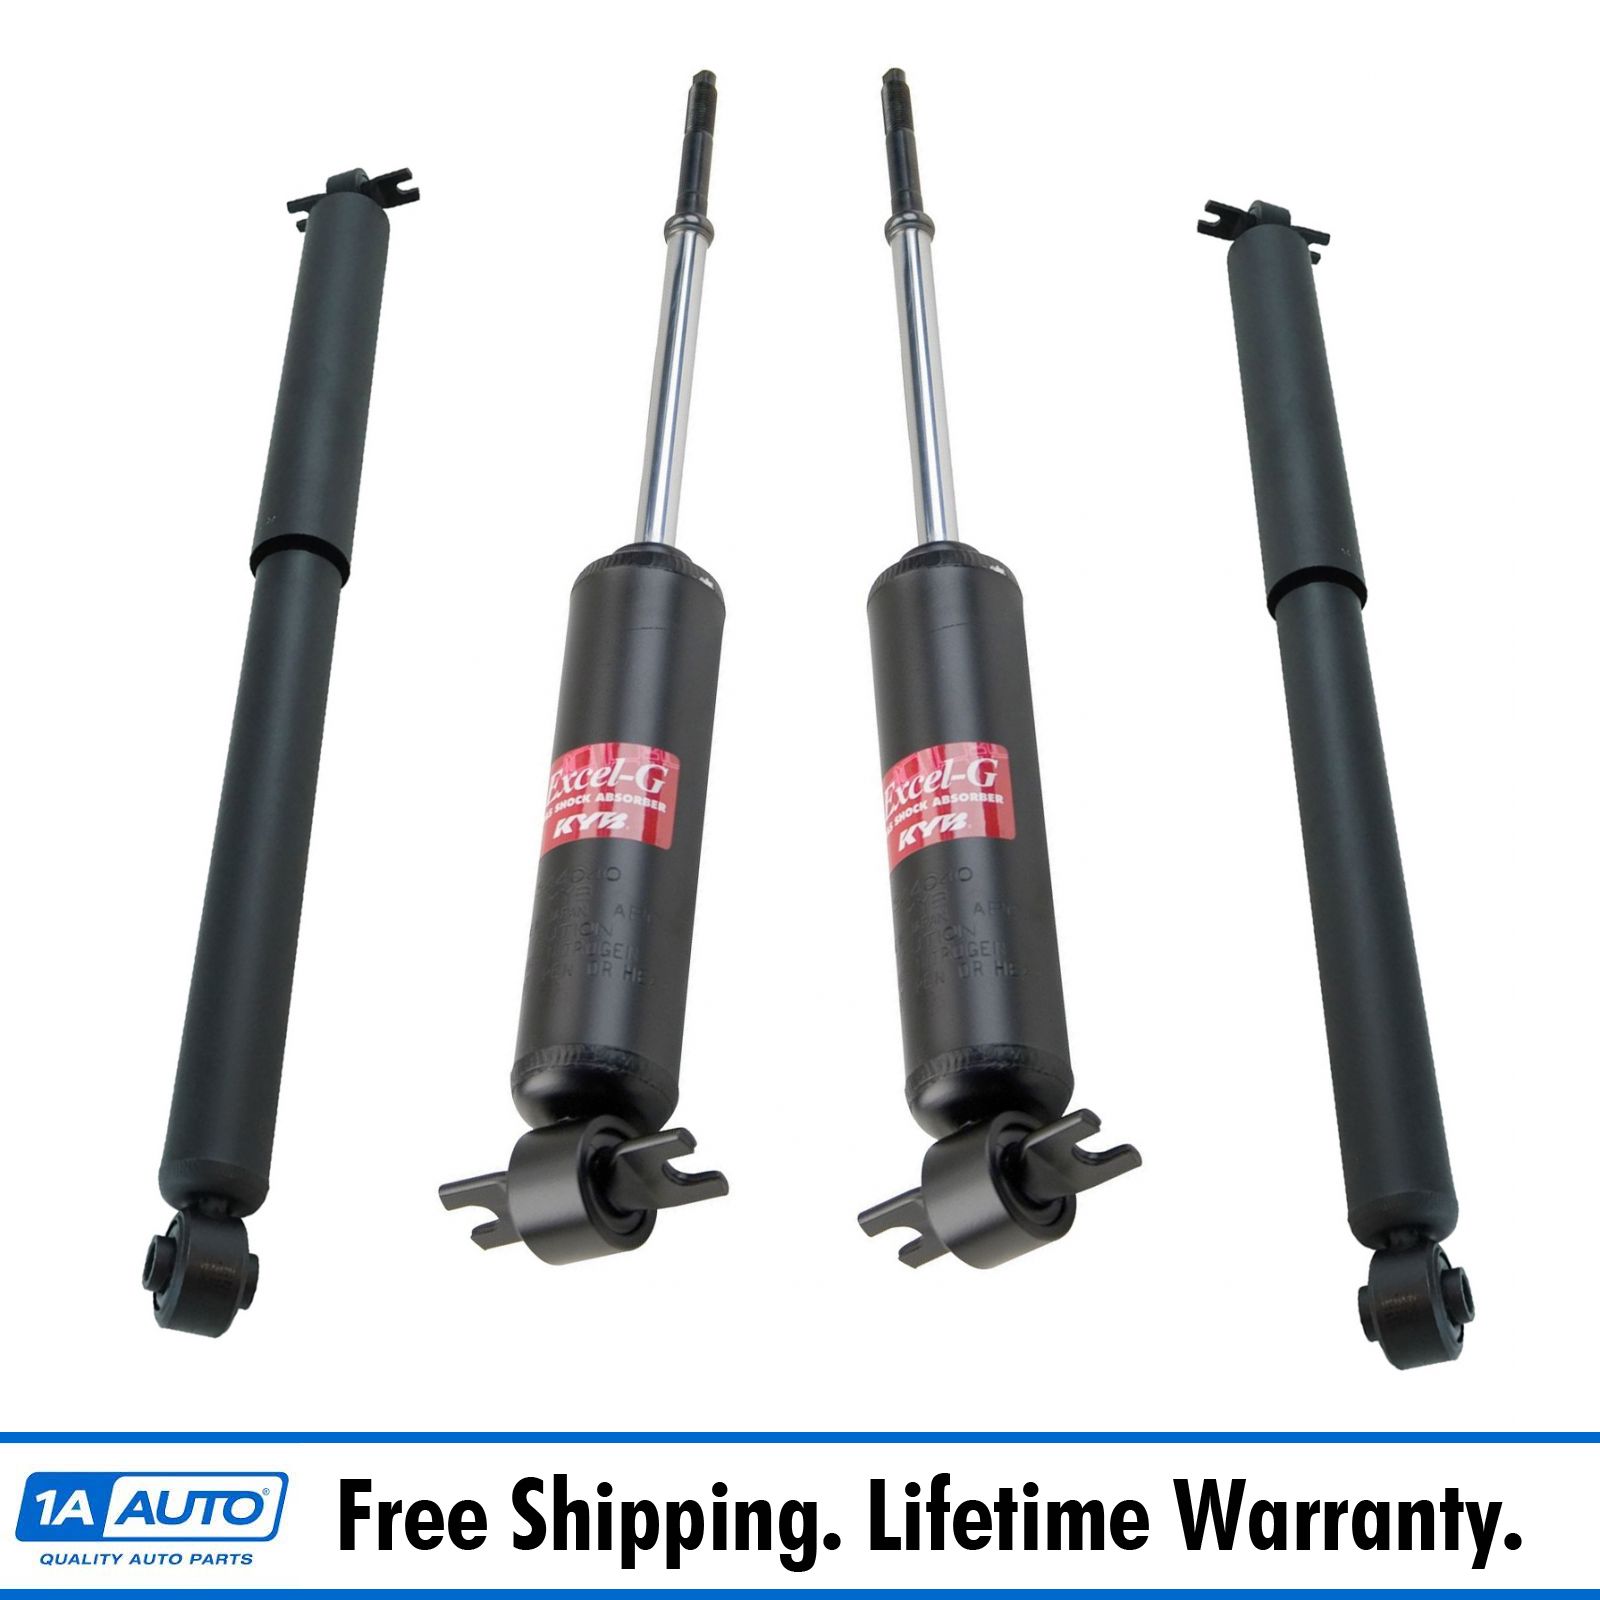 Monro-Matic Plus Front & Rear Shock Absorber Kit Set of 4 for Pickup Truck RWD 2WD 